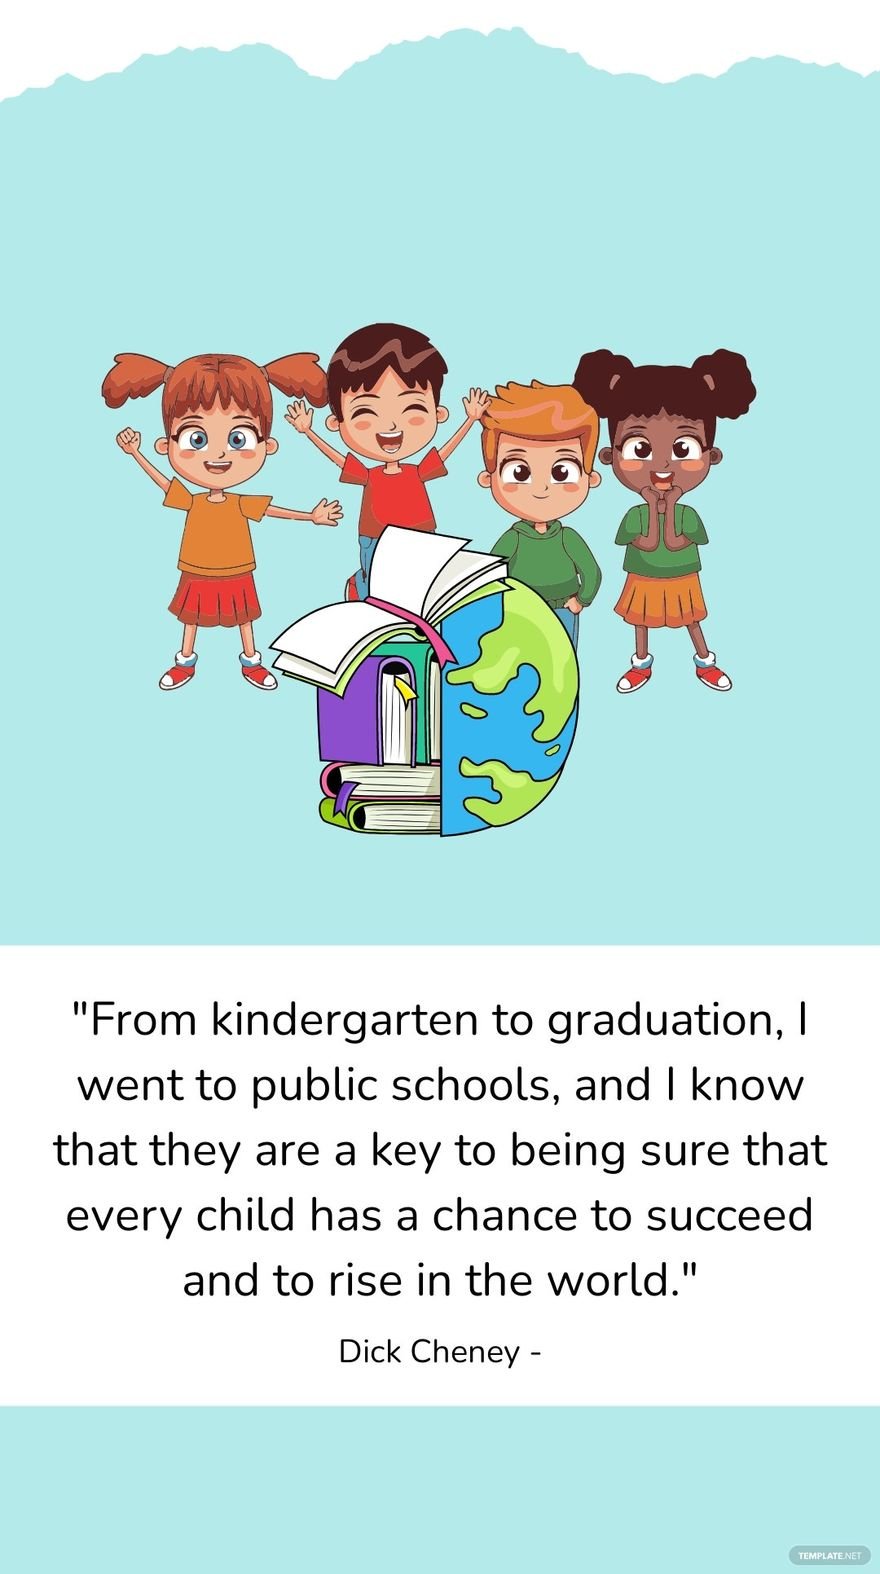 Dick Cheney - From kindergarten to graduation, I went to public schools, and I know that they are a key to being sure that every child has a chance to succeed and to rise in the world.